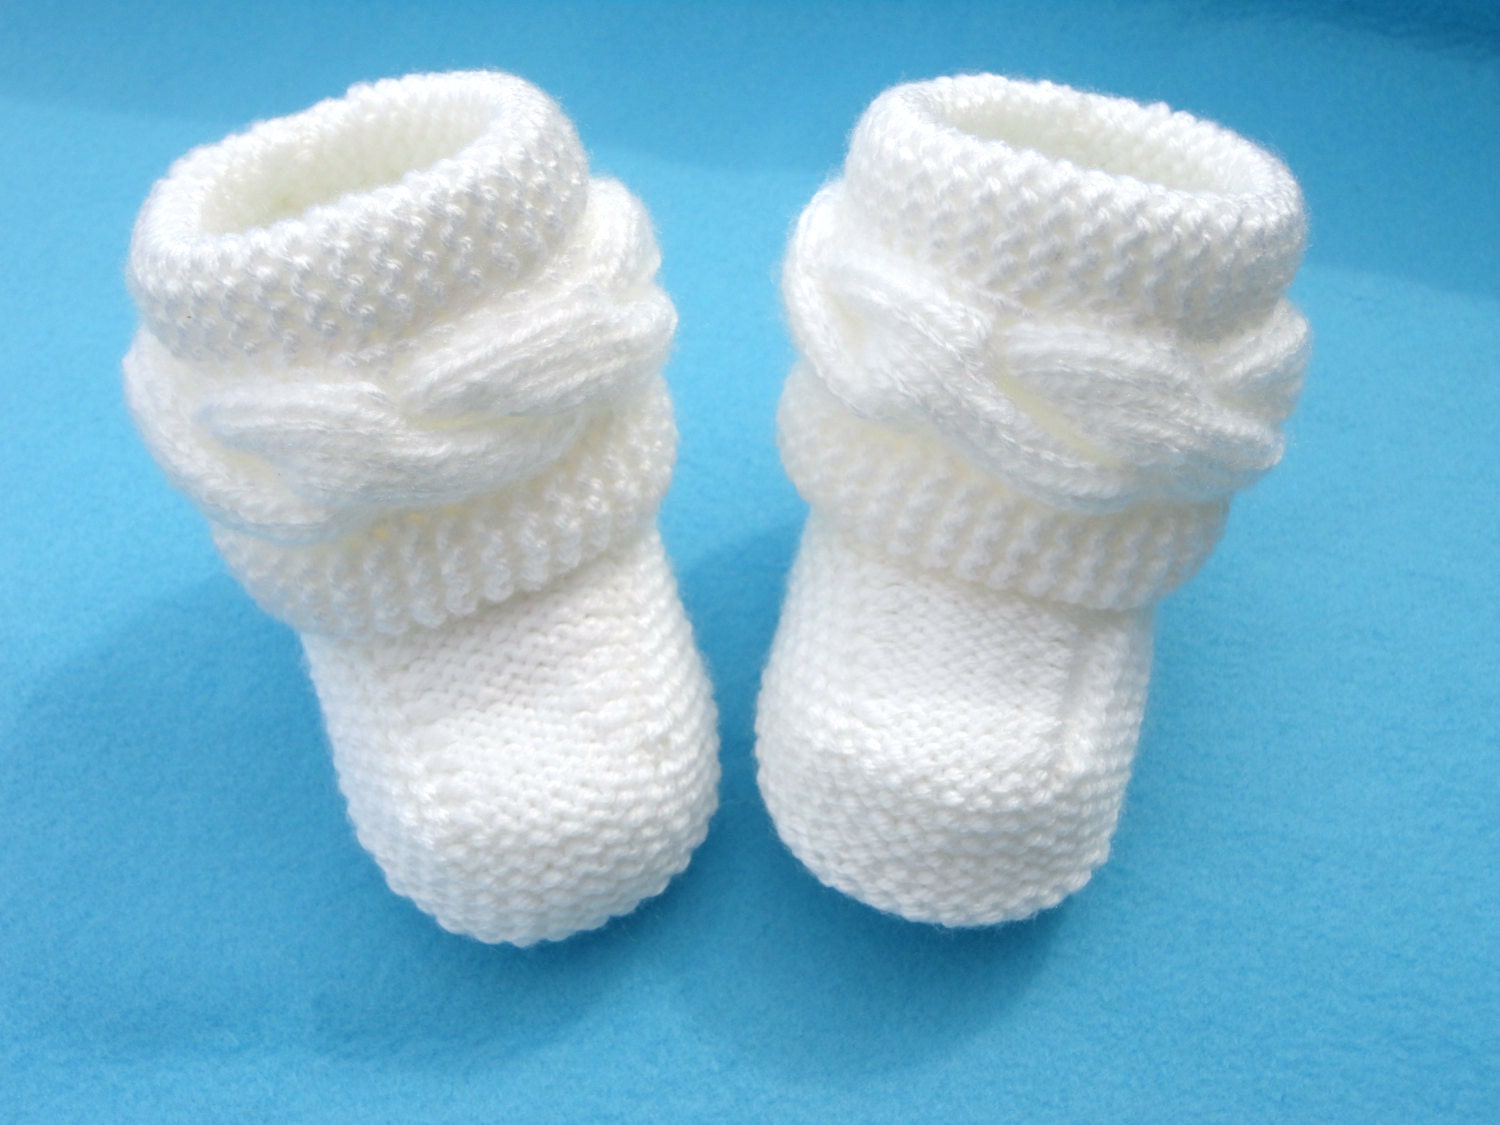 Baby Shoes P A T T E R N Baby Booties Patterns Knitted Baby Booties Knitting Pattern Baby Booty Baby Uggs Patterns Baby Boots ( PDF file )